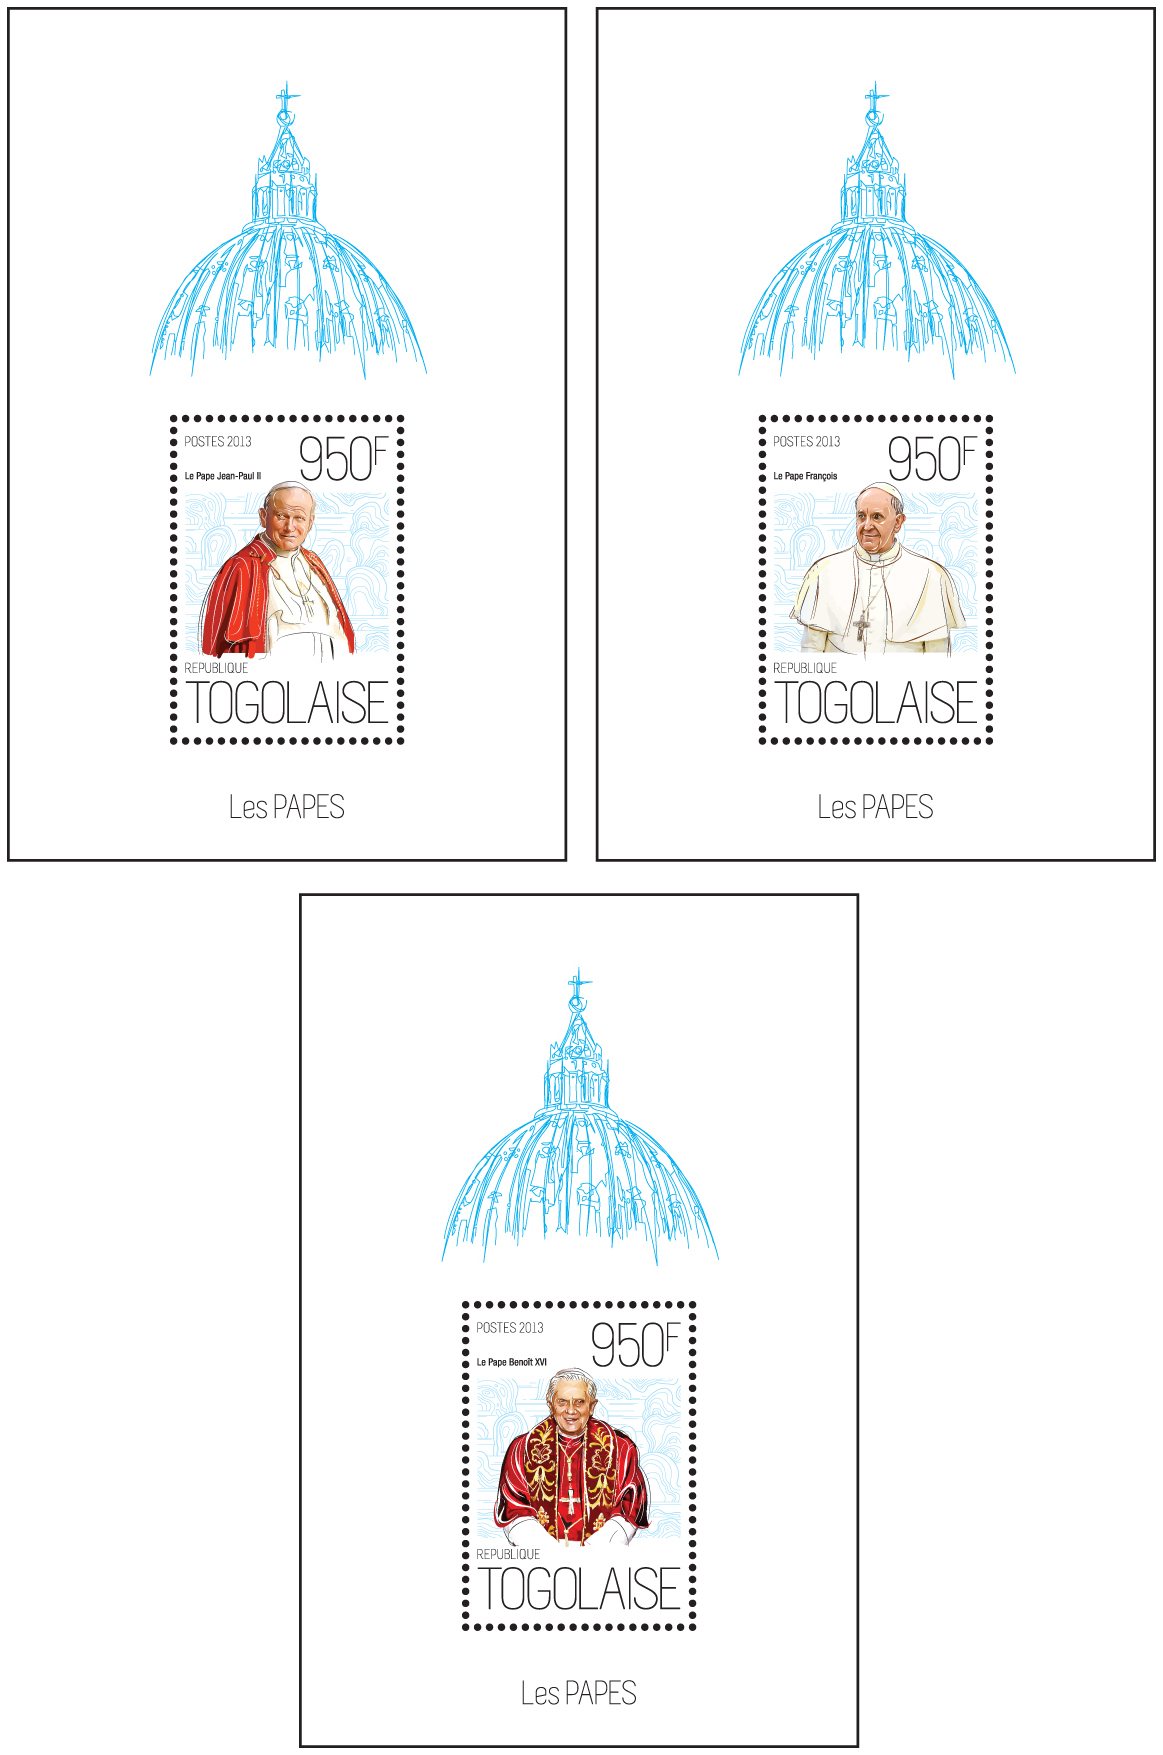 Popes - Issue of Togo postage stamps